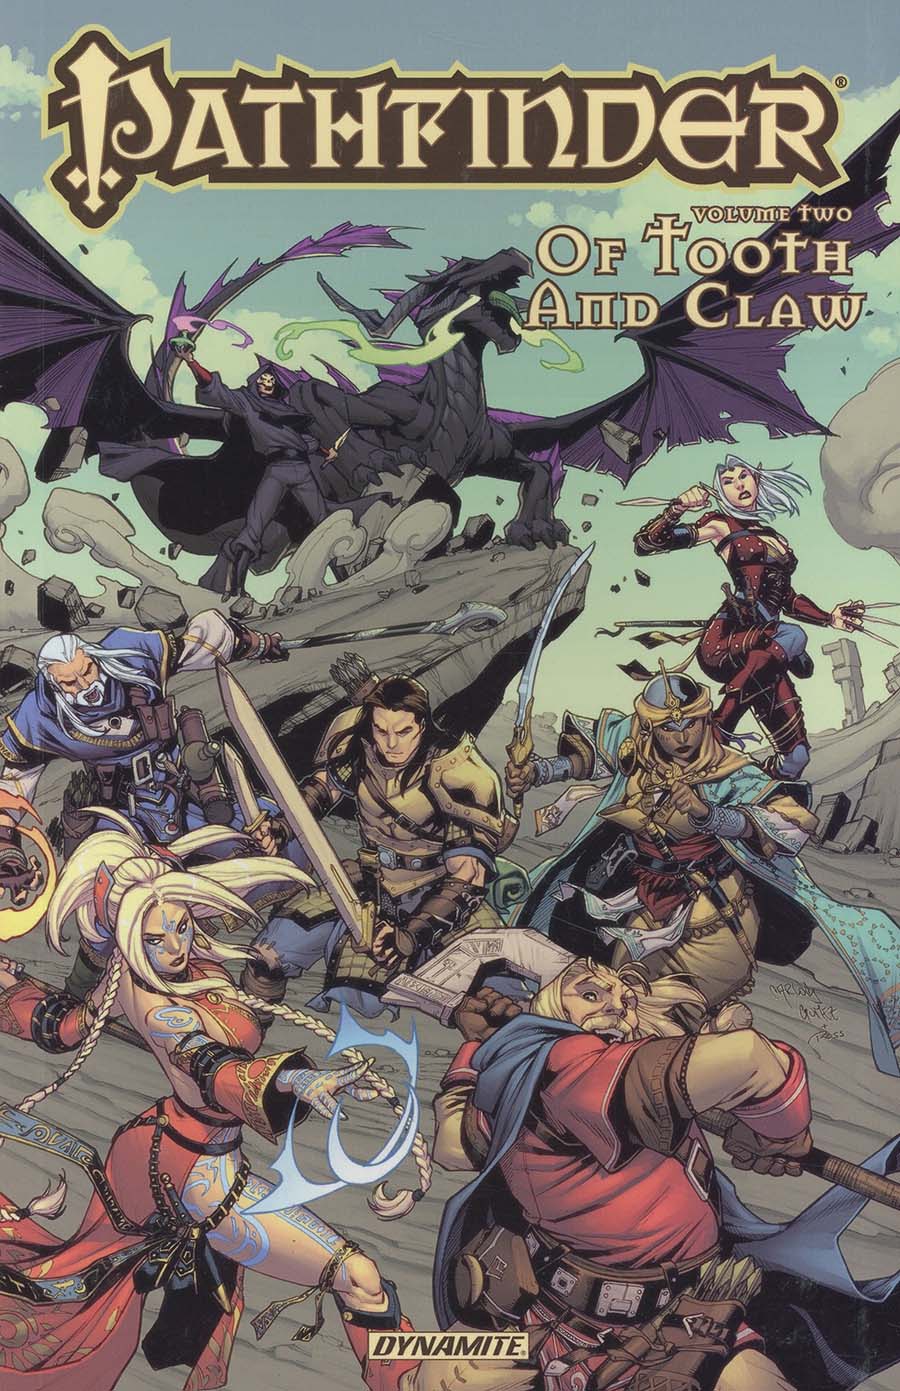 Pathfinder Vol 2 Of Tooth And Claw TP